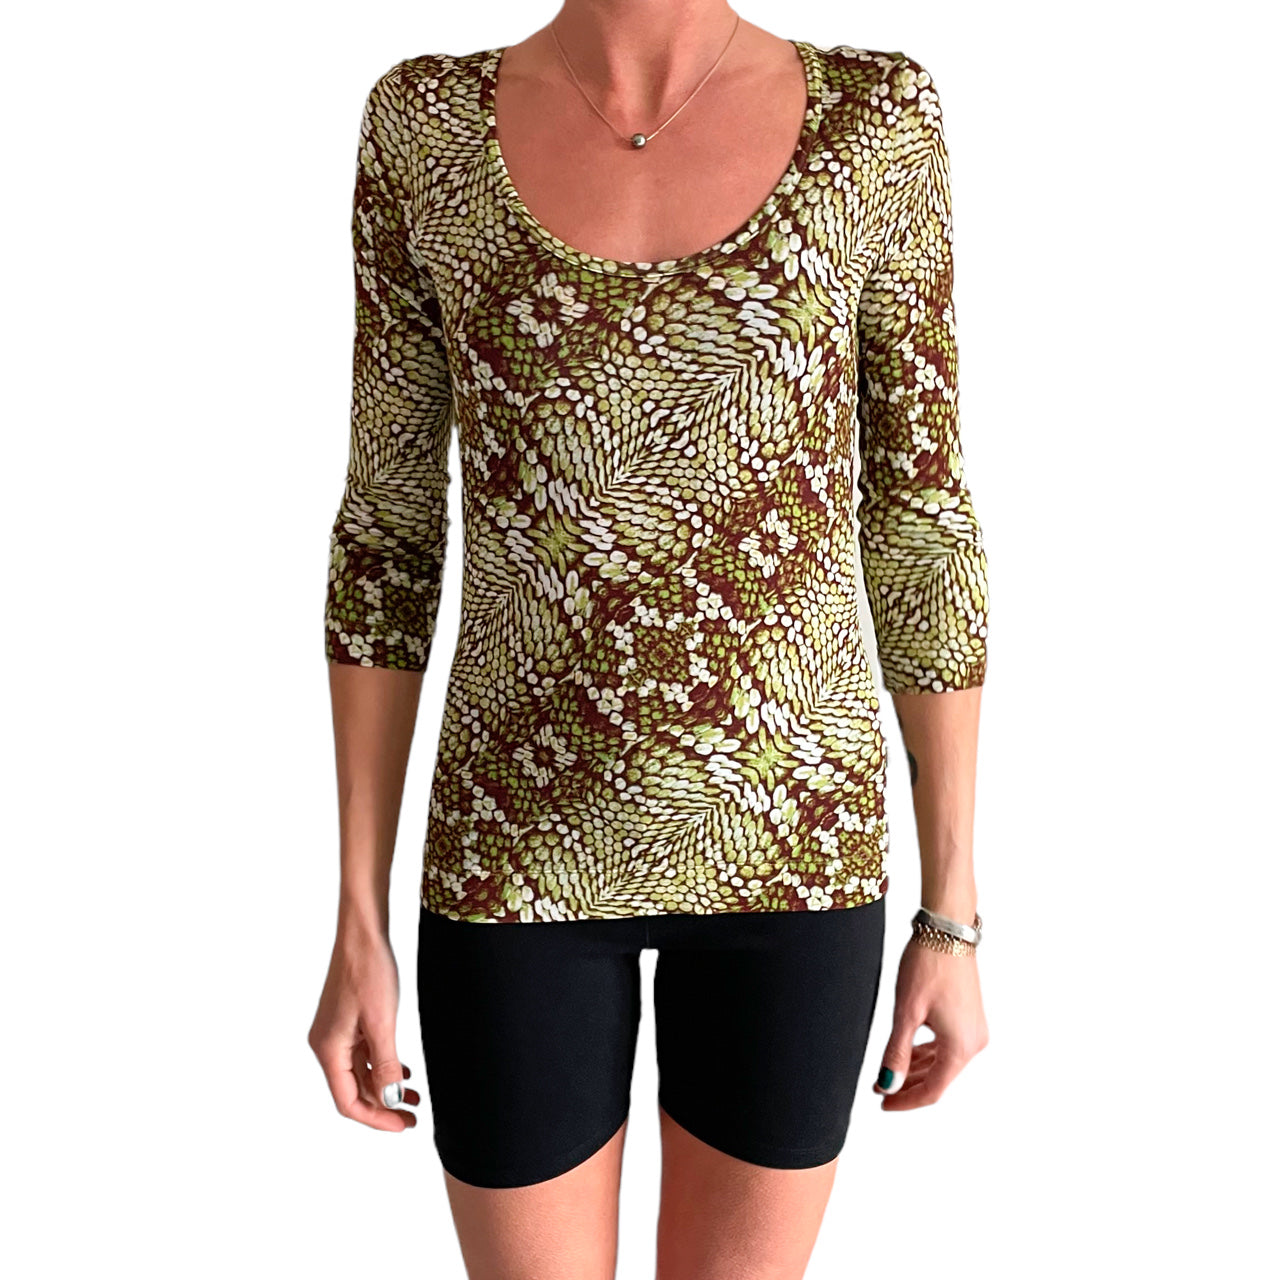 Just Cavalli Lime Patterned Top